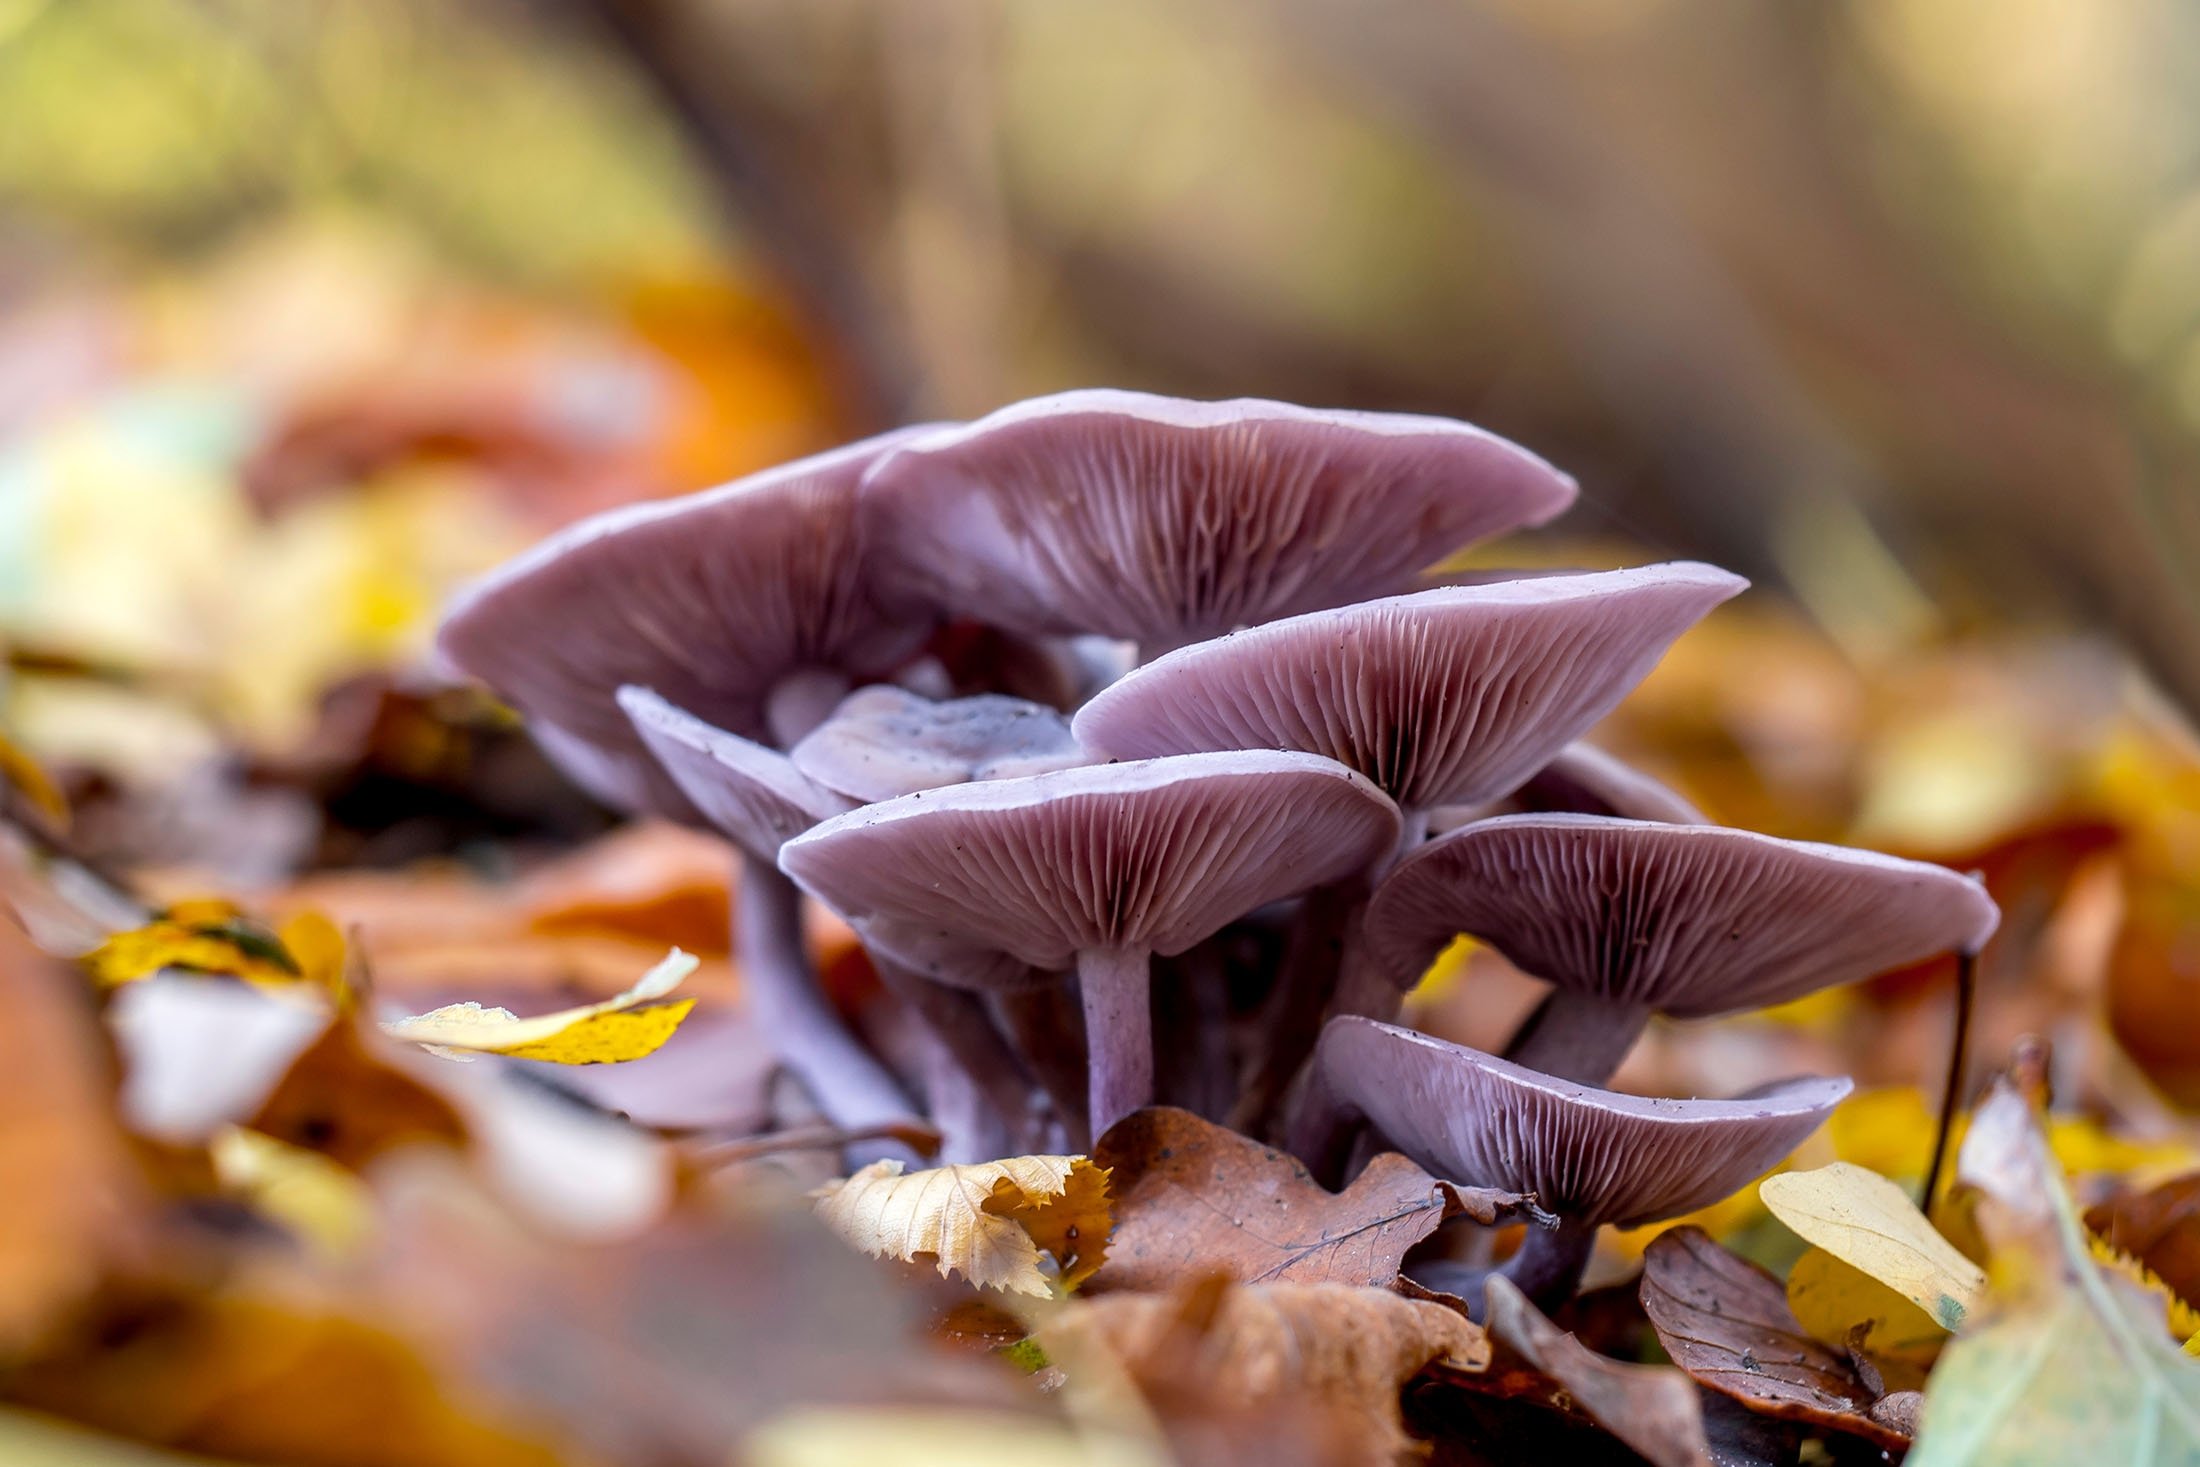 Wood blewit mushroom gives off a very nice smell where it grows. (Shutterstock Photo)